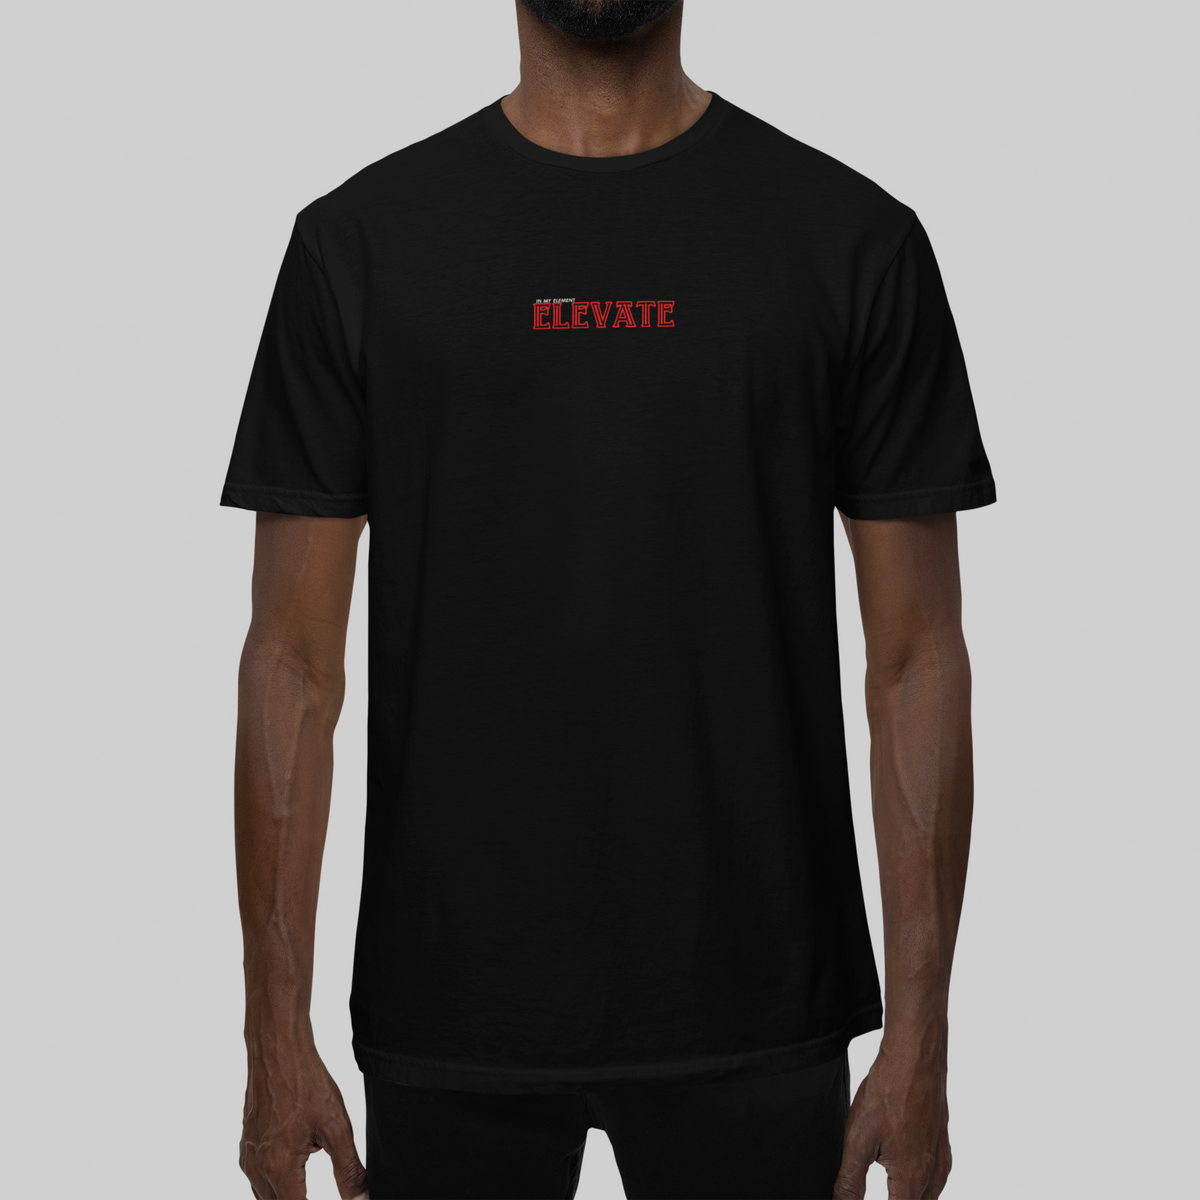 Elevate your Life Unisex T-shirt